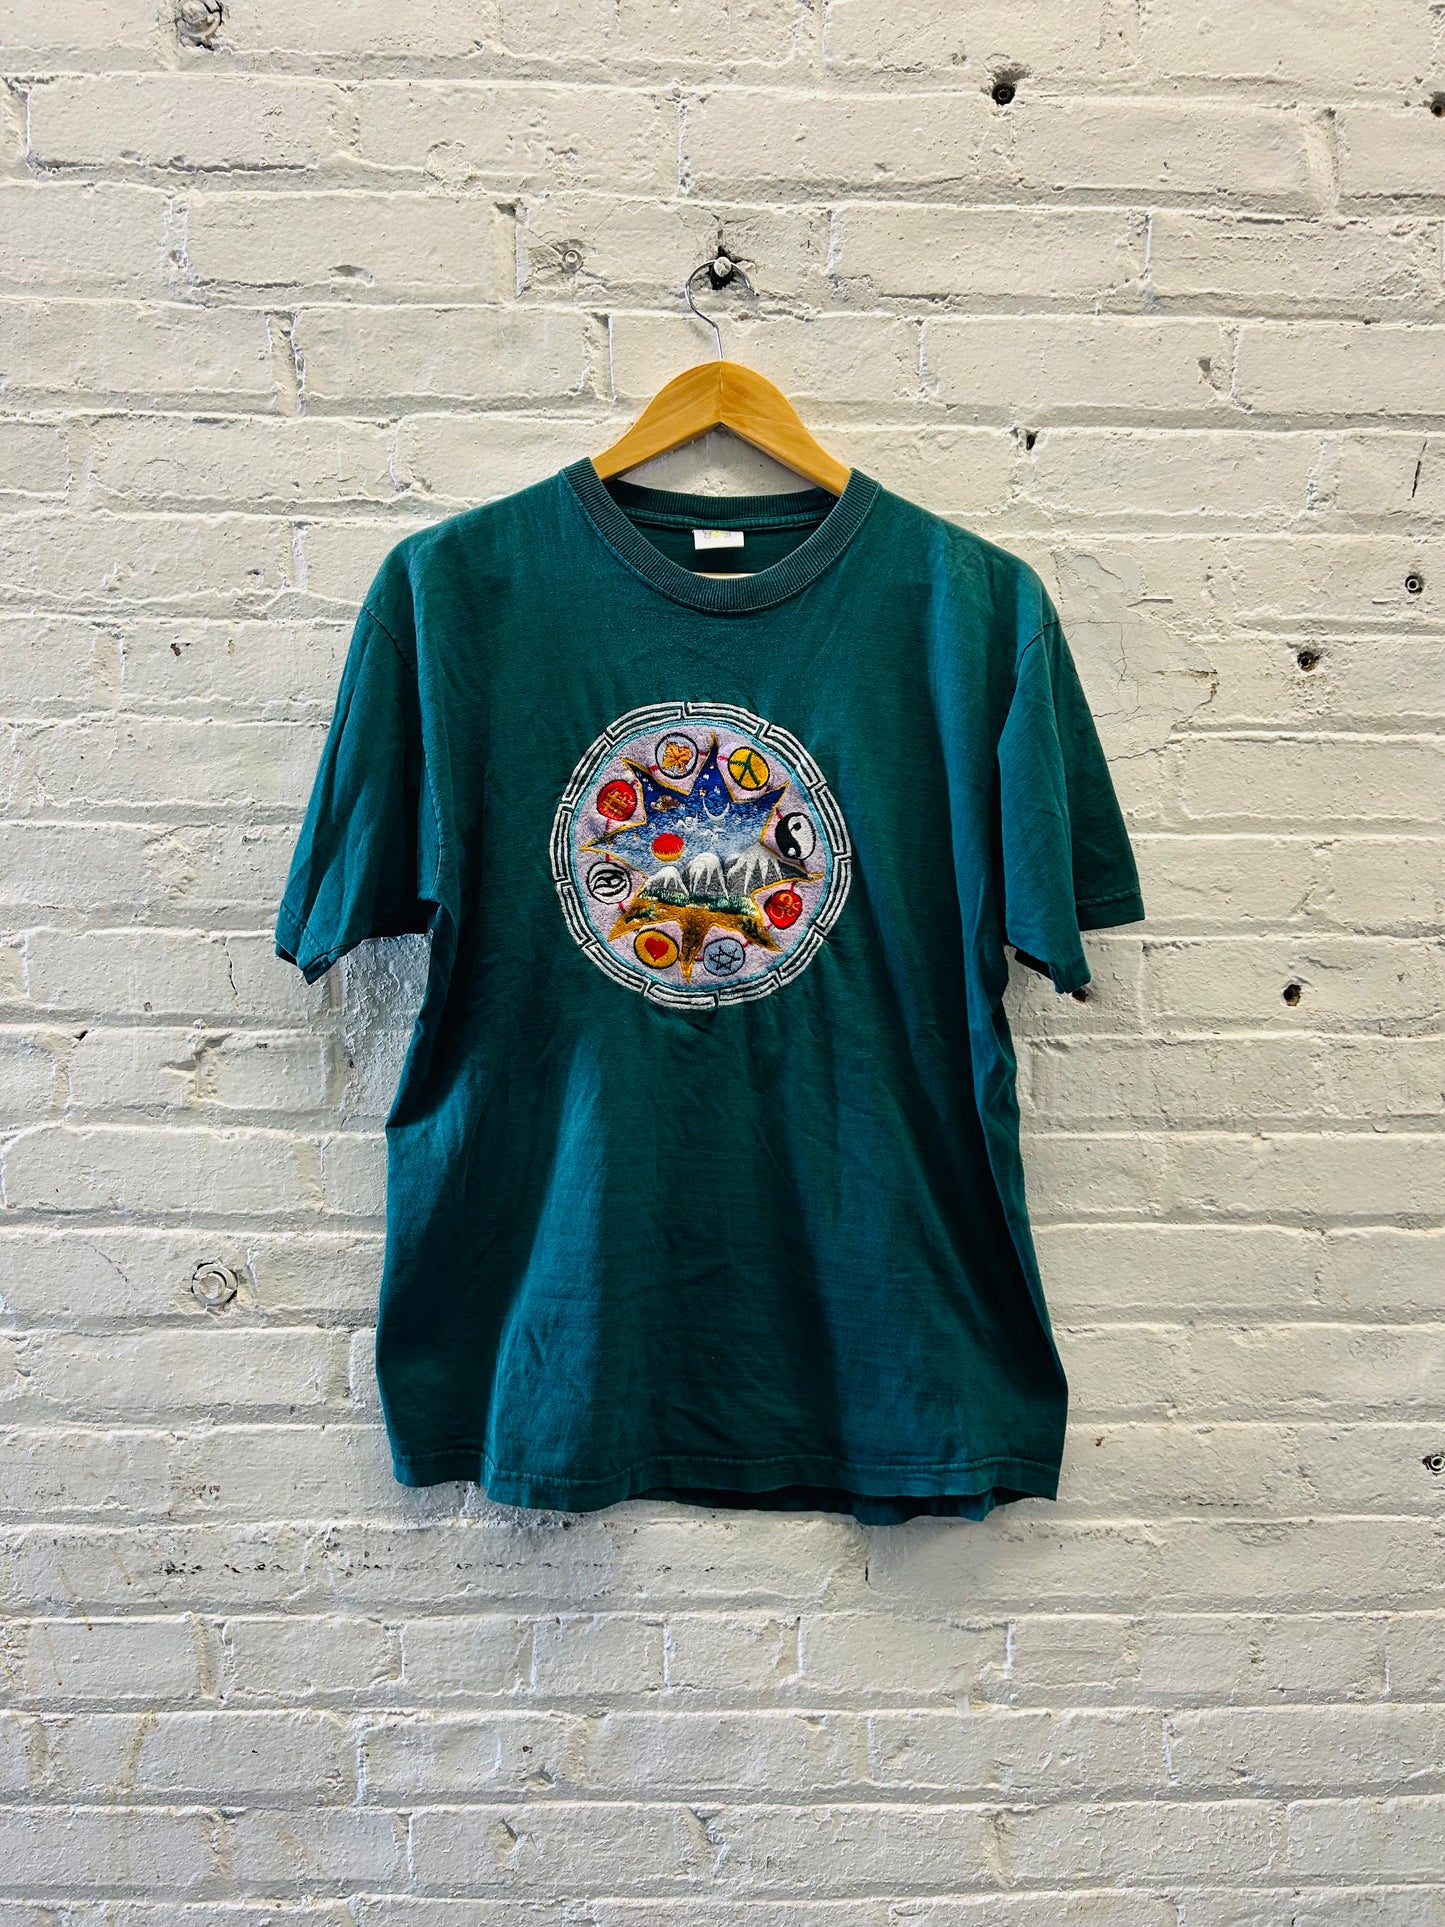 Embroidered Mountains Patch Tee - Medium